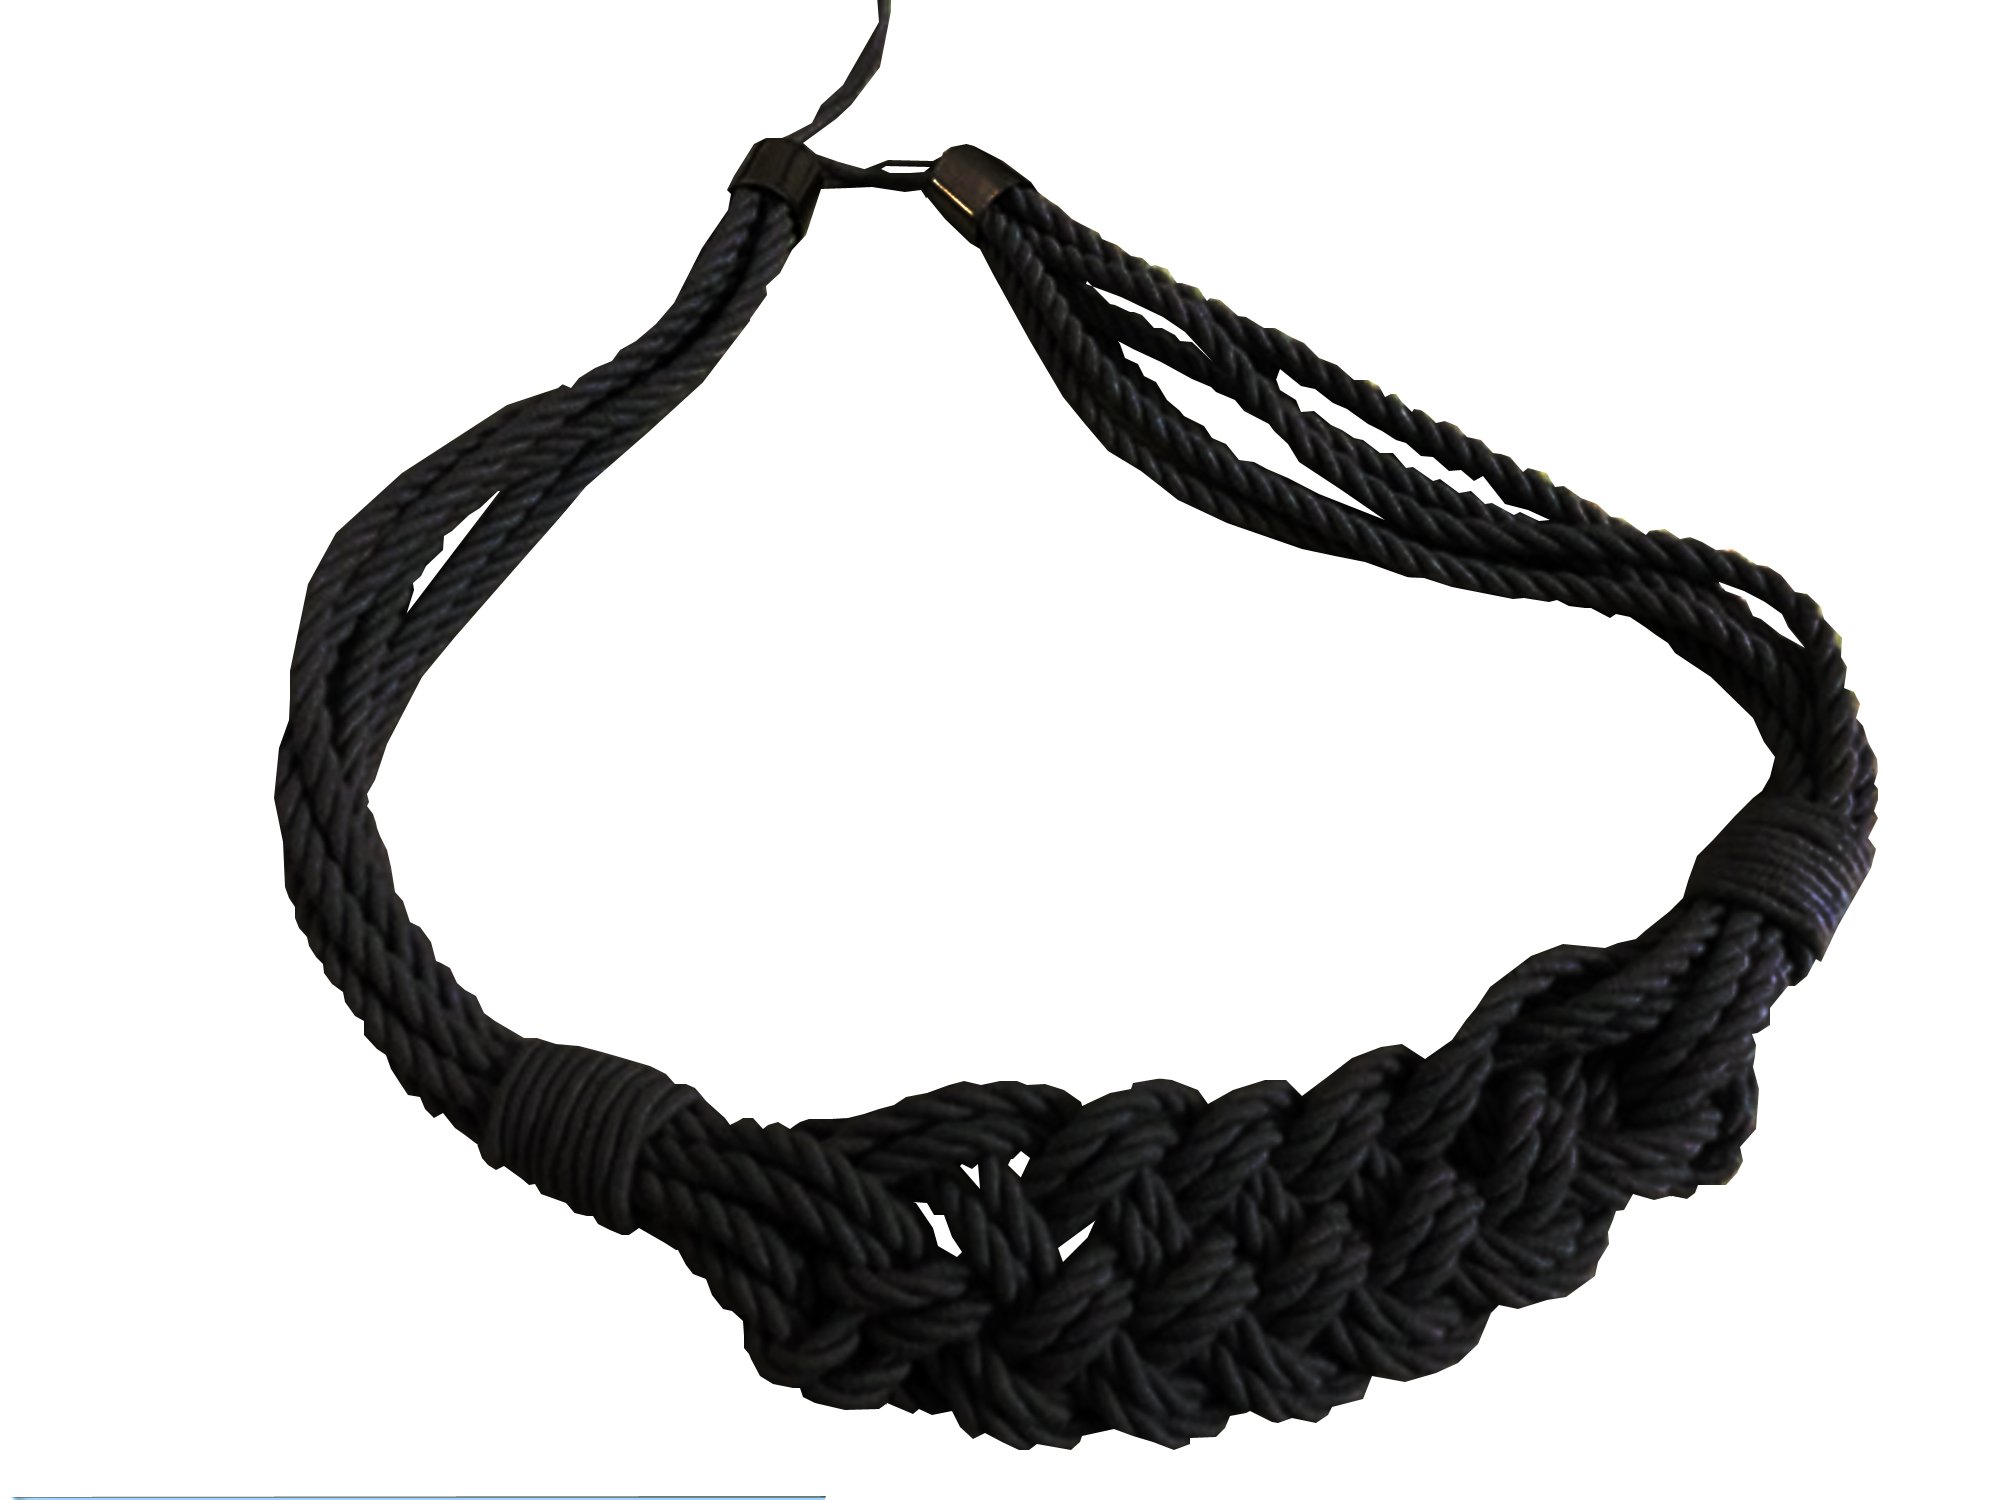 PAIR 2 pieces Natural Cotton Curtain Tie Backs with Macrame Rope Weave - Black 85cm